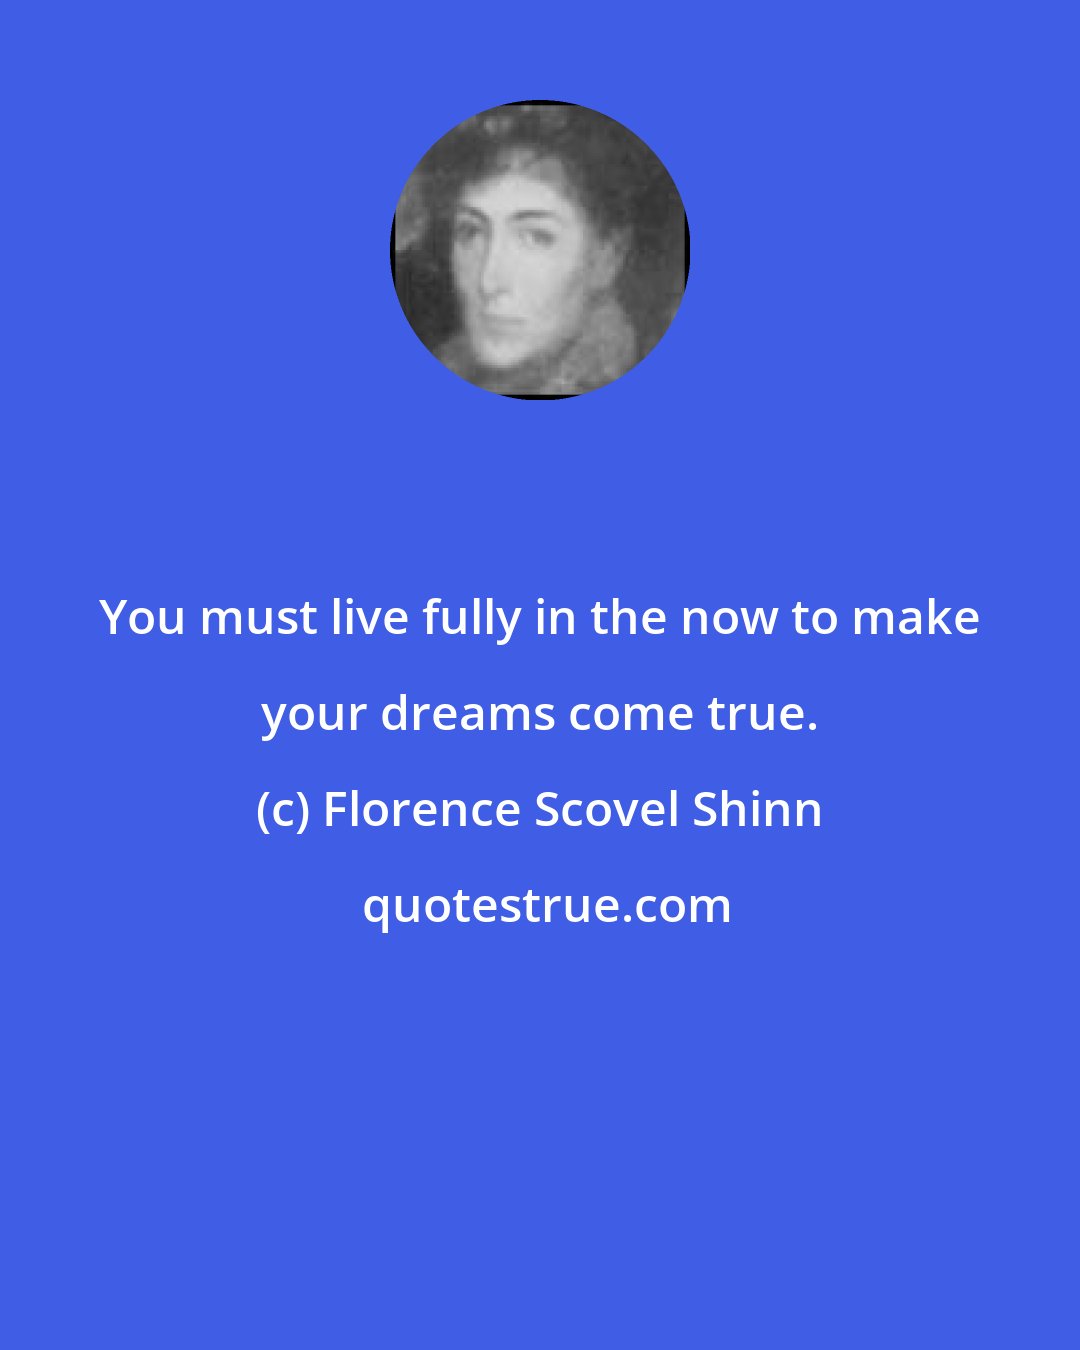 Florence Scovel Shinn: You must live fully in the now to make your dreams come true.